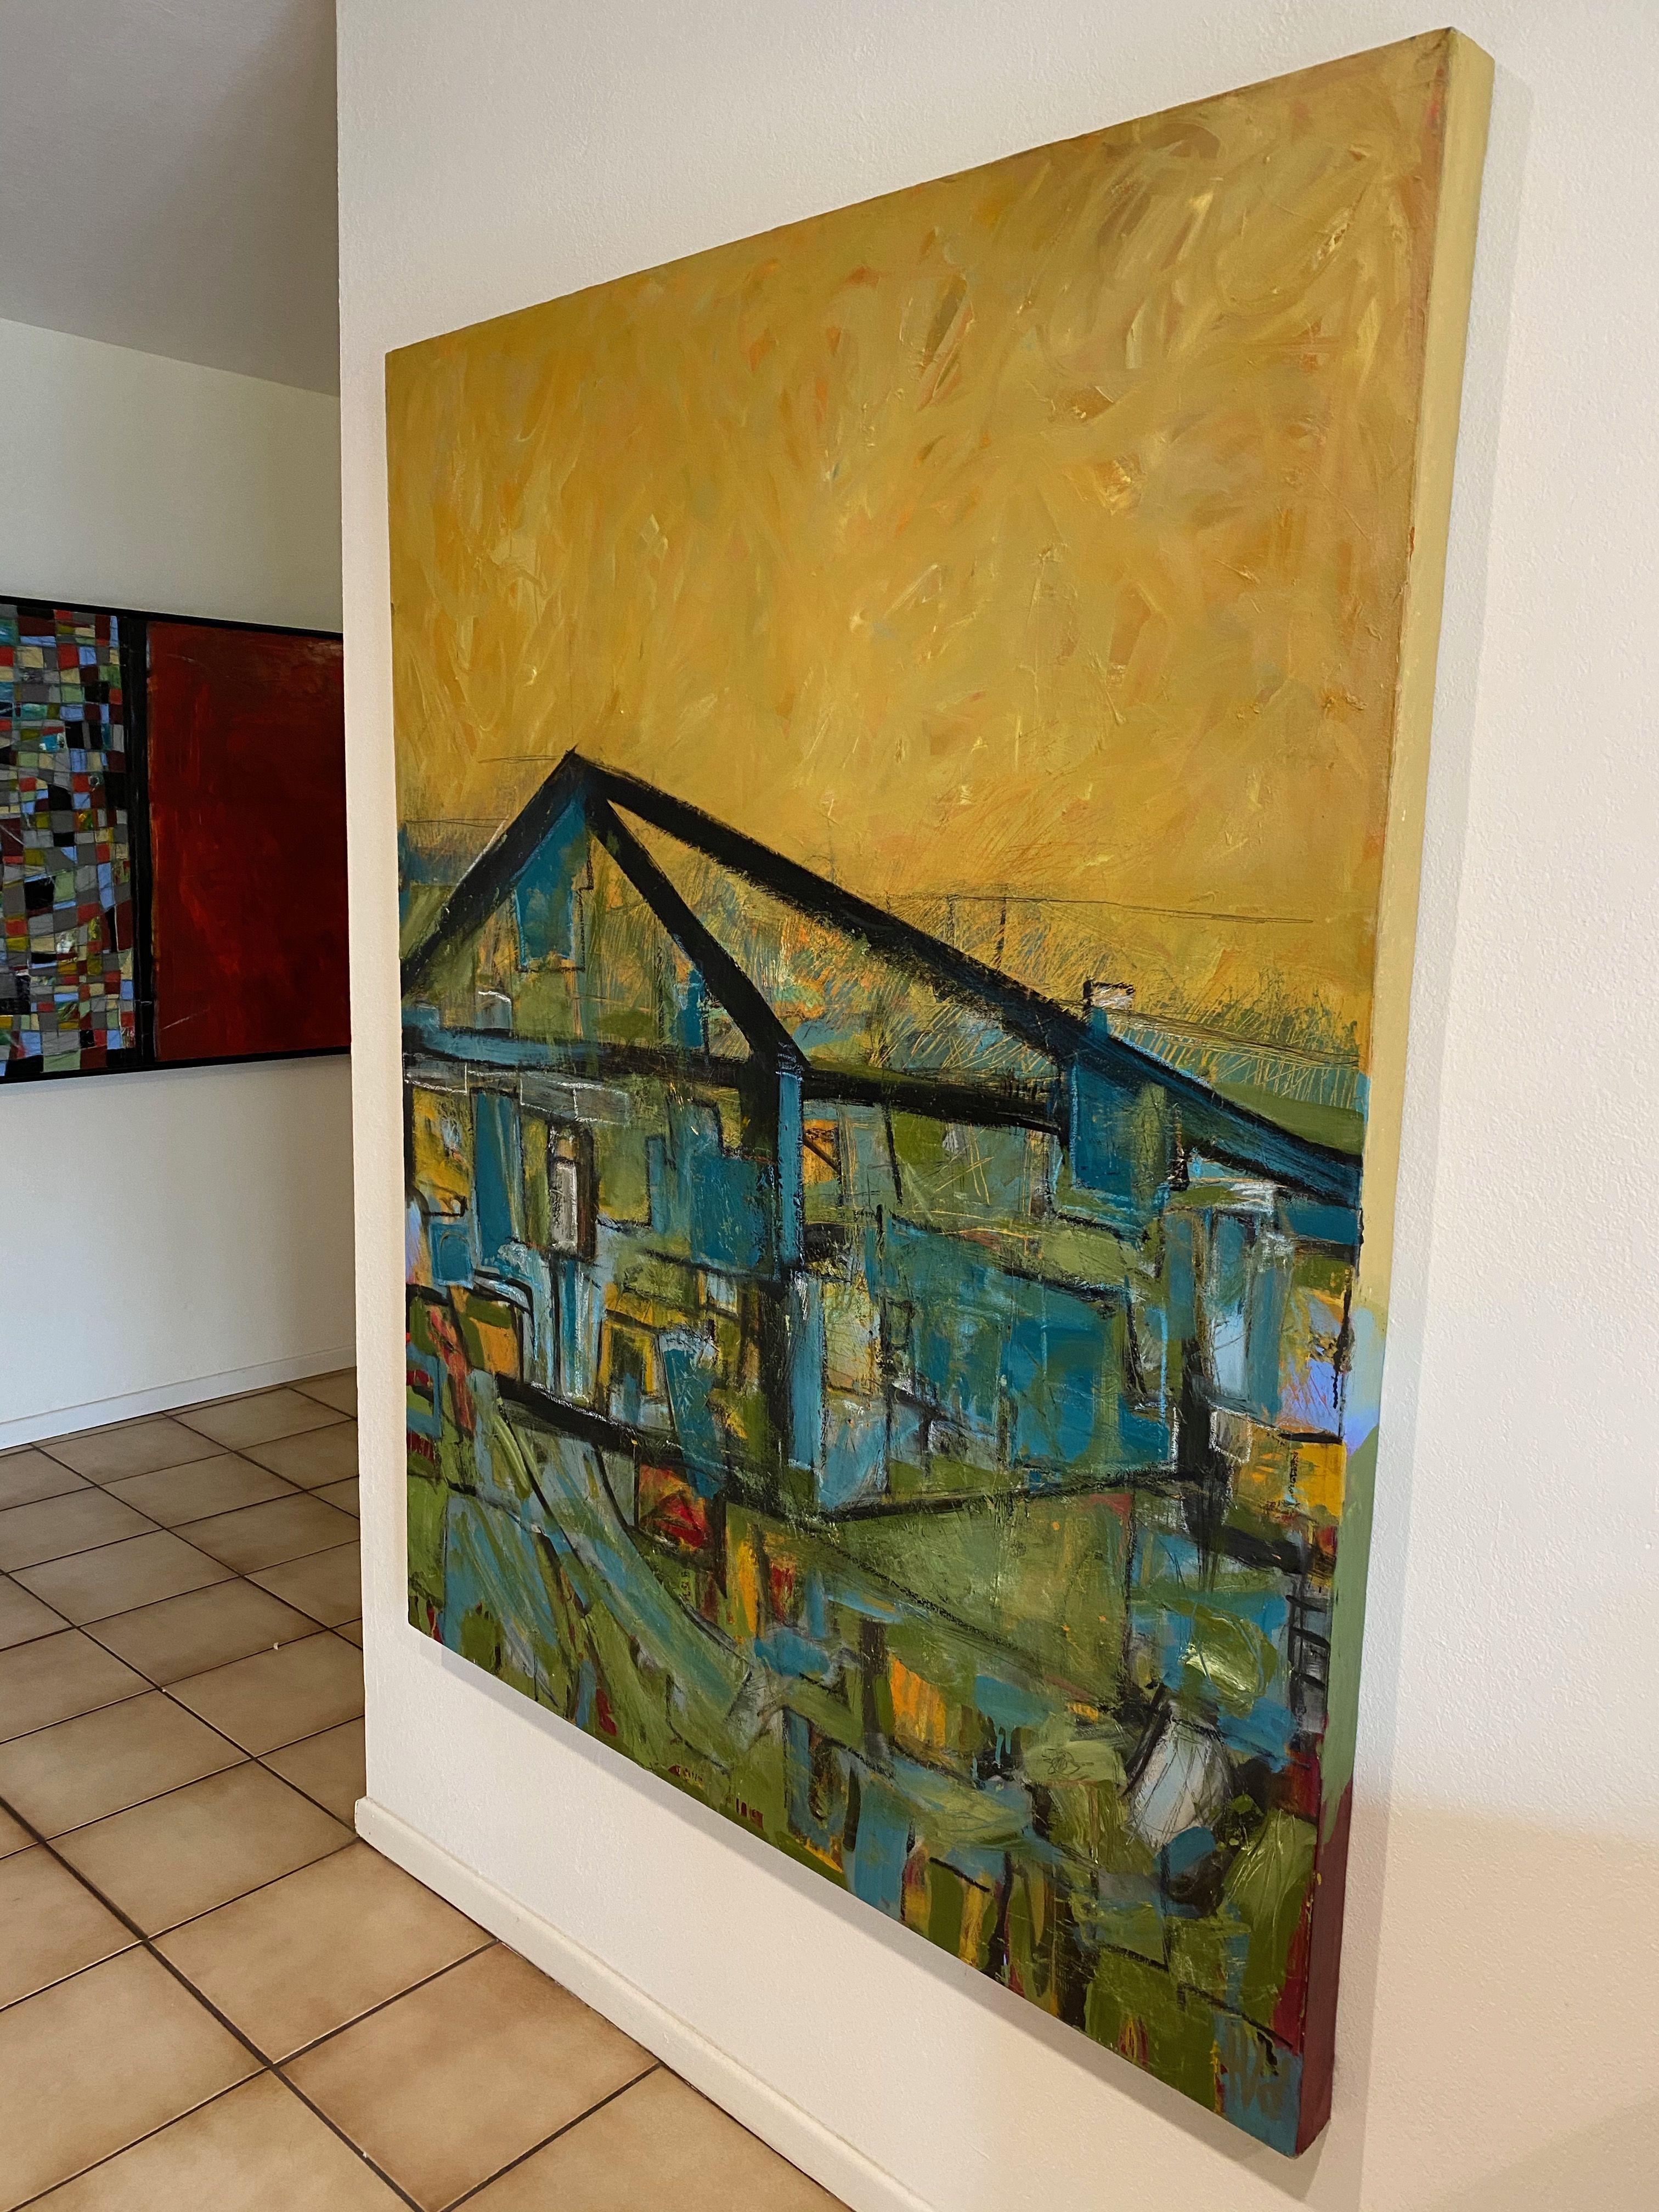 Glasshouse, Painting, Acrylic on Canvas - Brown Abstract Painting by Theresa Vandenberg Donche